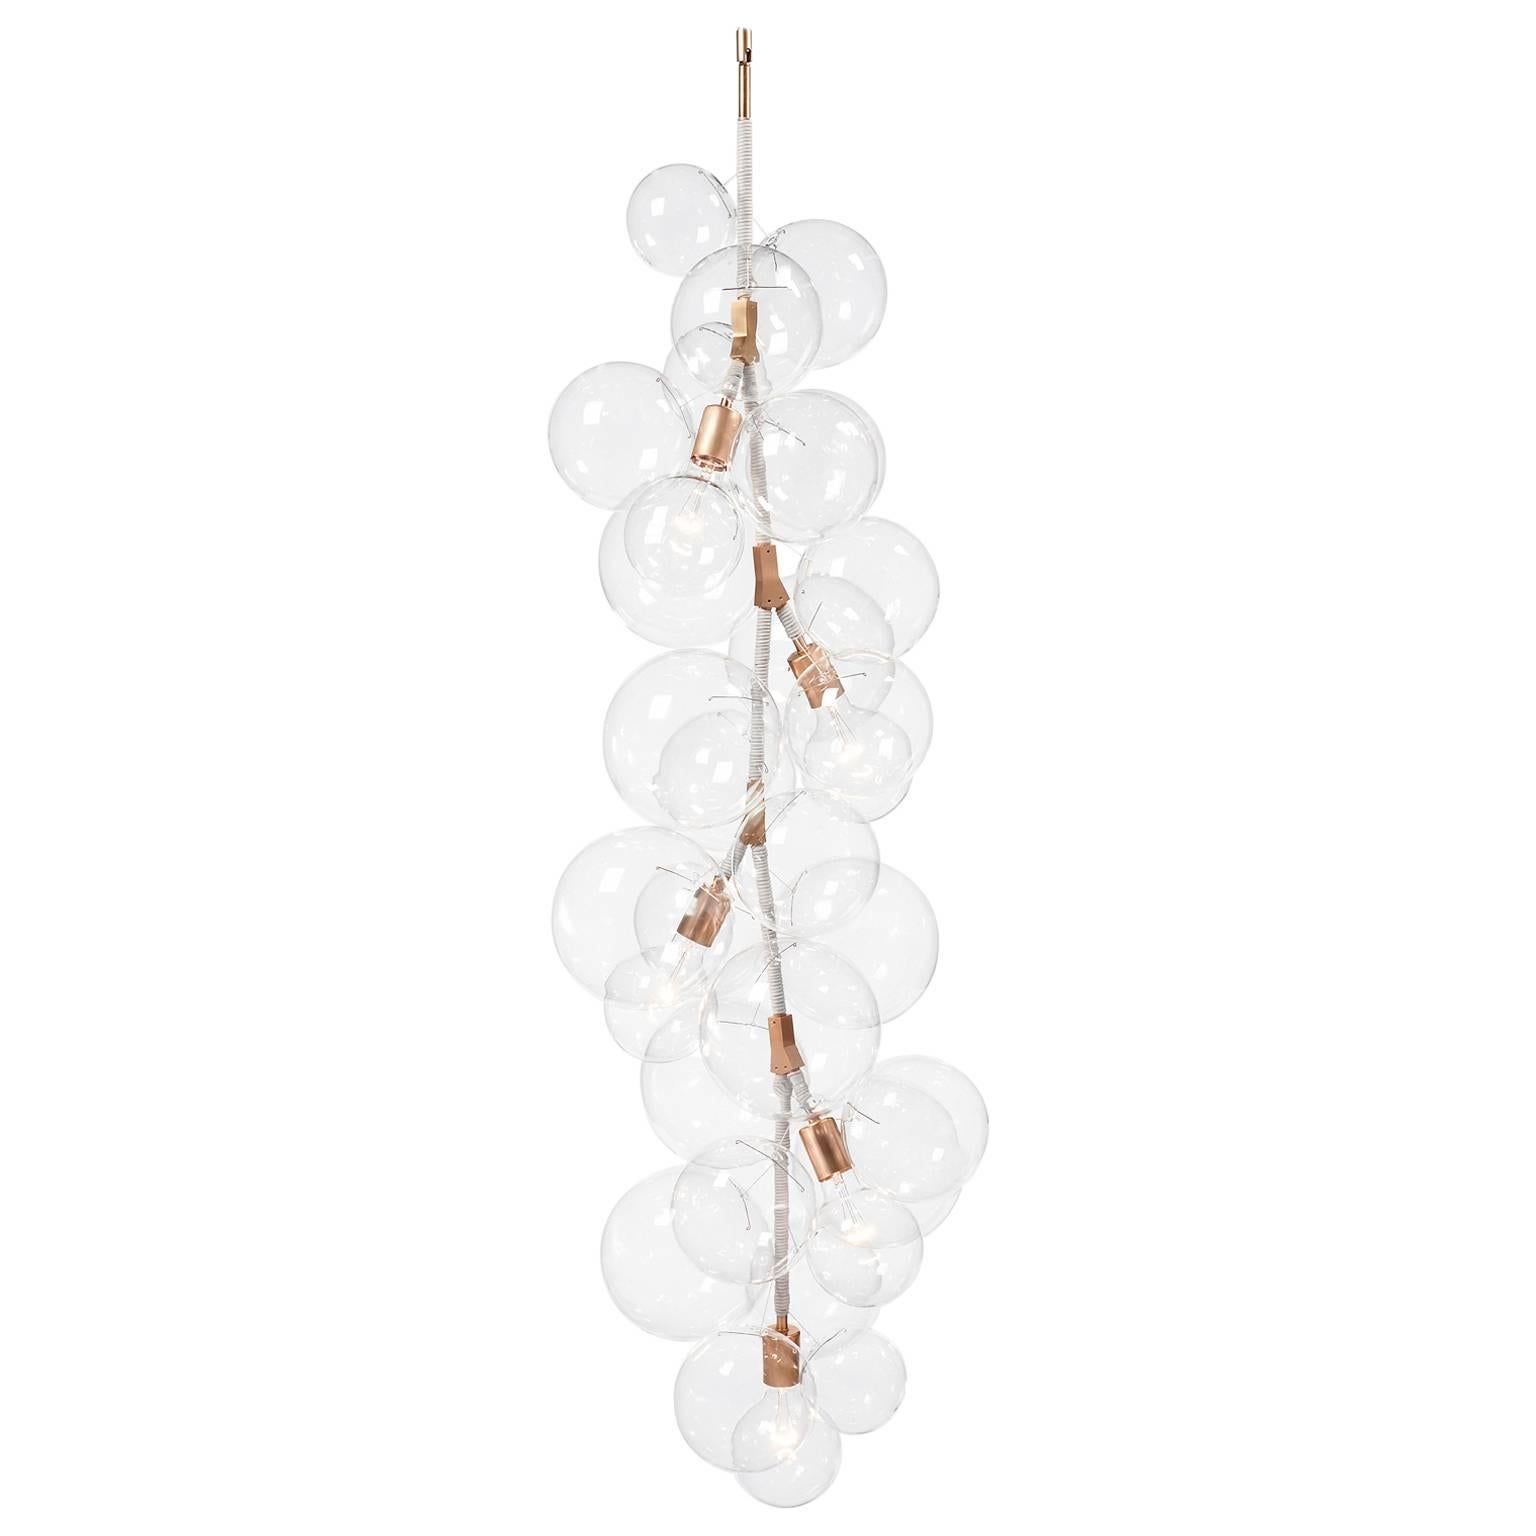 X-Tall Bubble Chandelier in White Leather and Satin Brass by PELLE